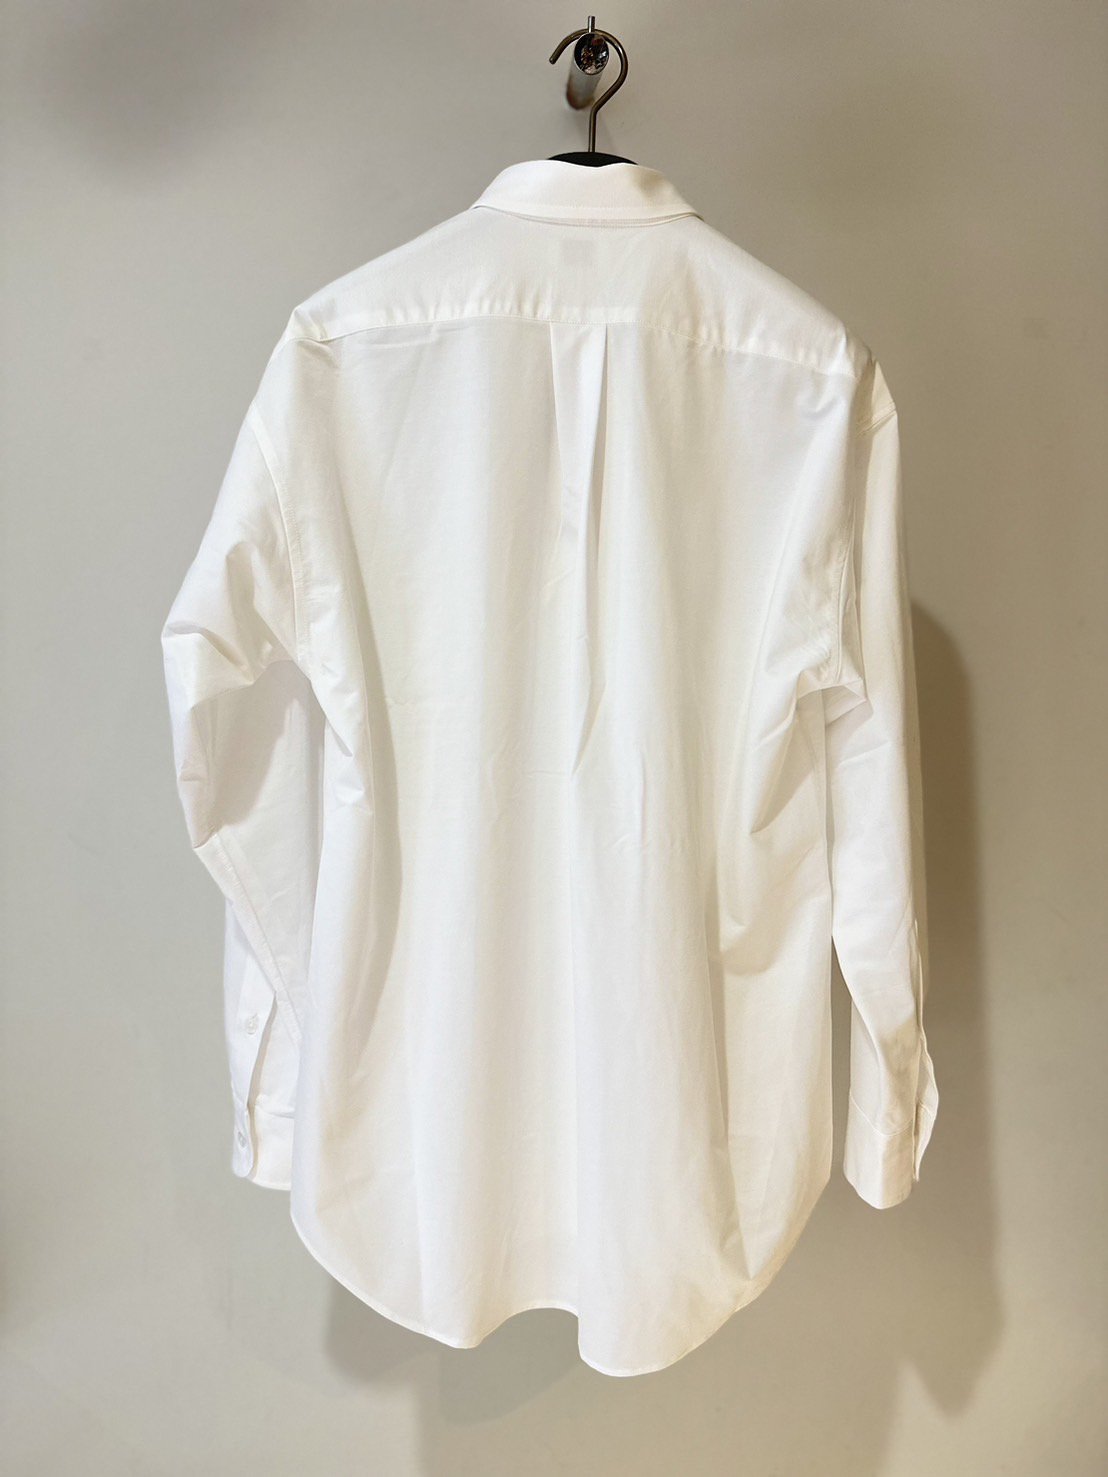 ALLEGE<br />AllegeKANEMASA Standaed Shirt / White<img class='new_mark_img2' src='https://img.shop-pro.jp/img/new/icons14.gif' style='border:none;display:inline;margin:0px;padding:0px;width:auto;' />